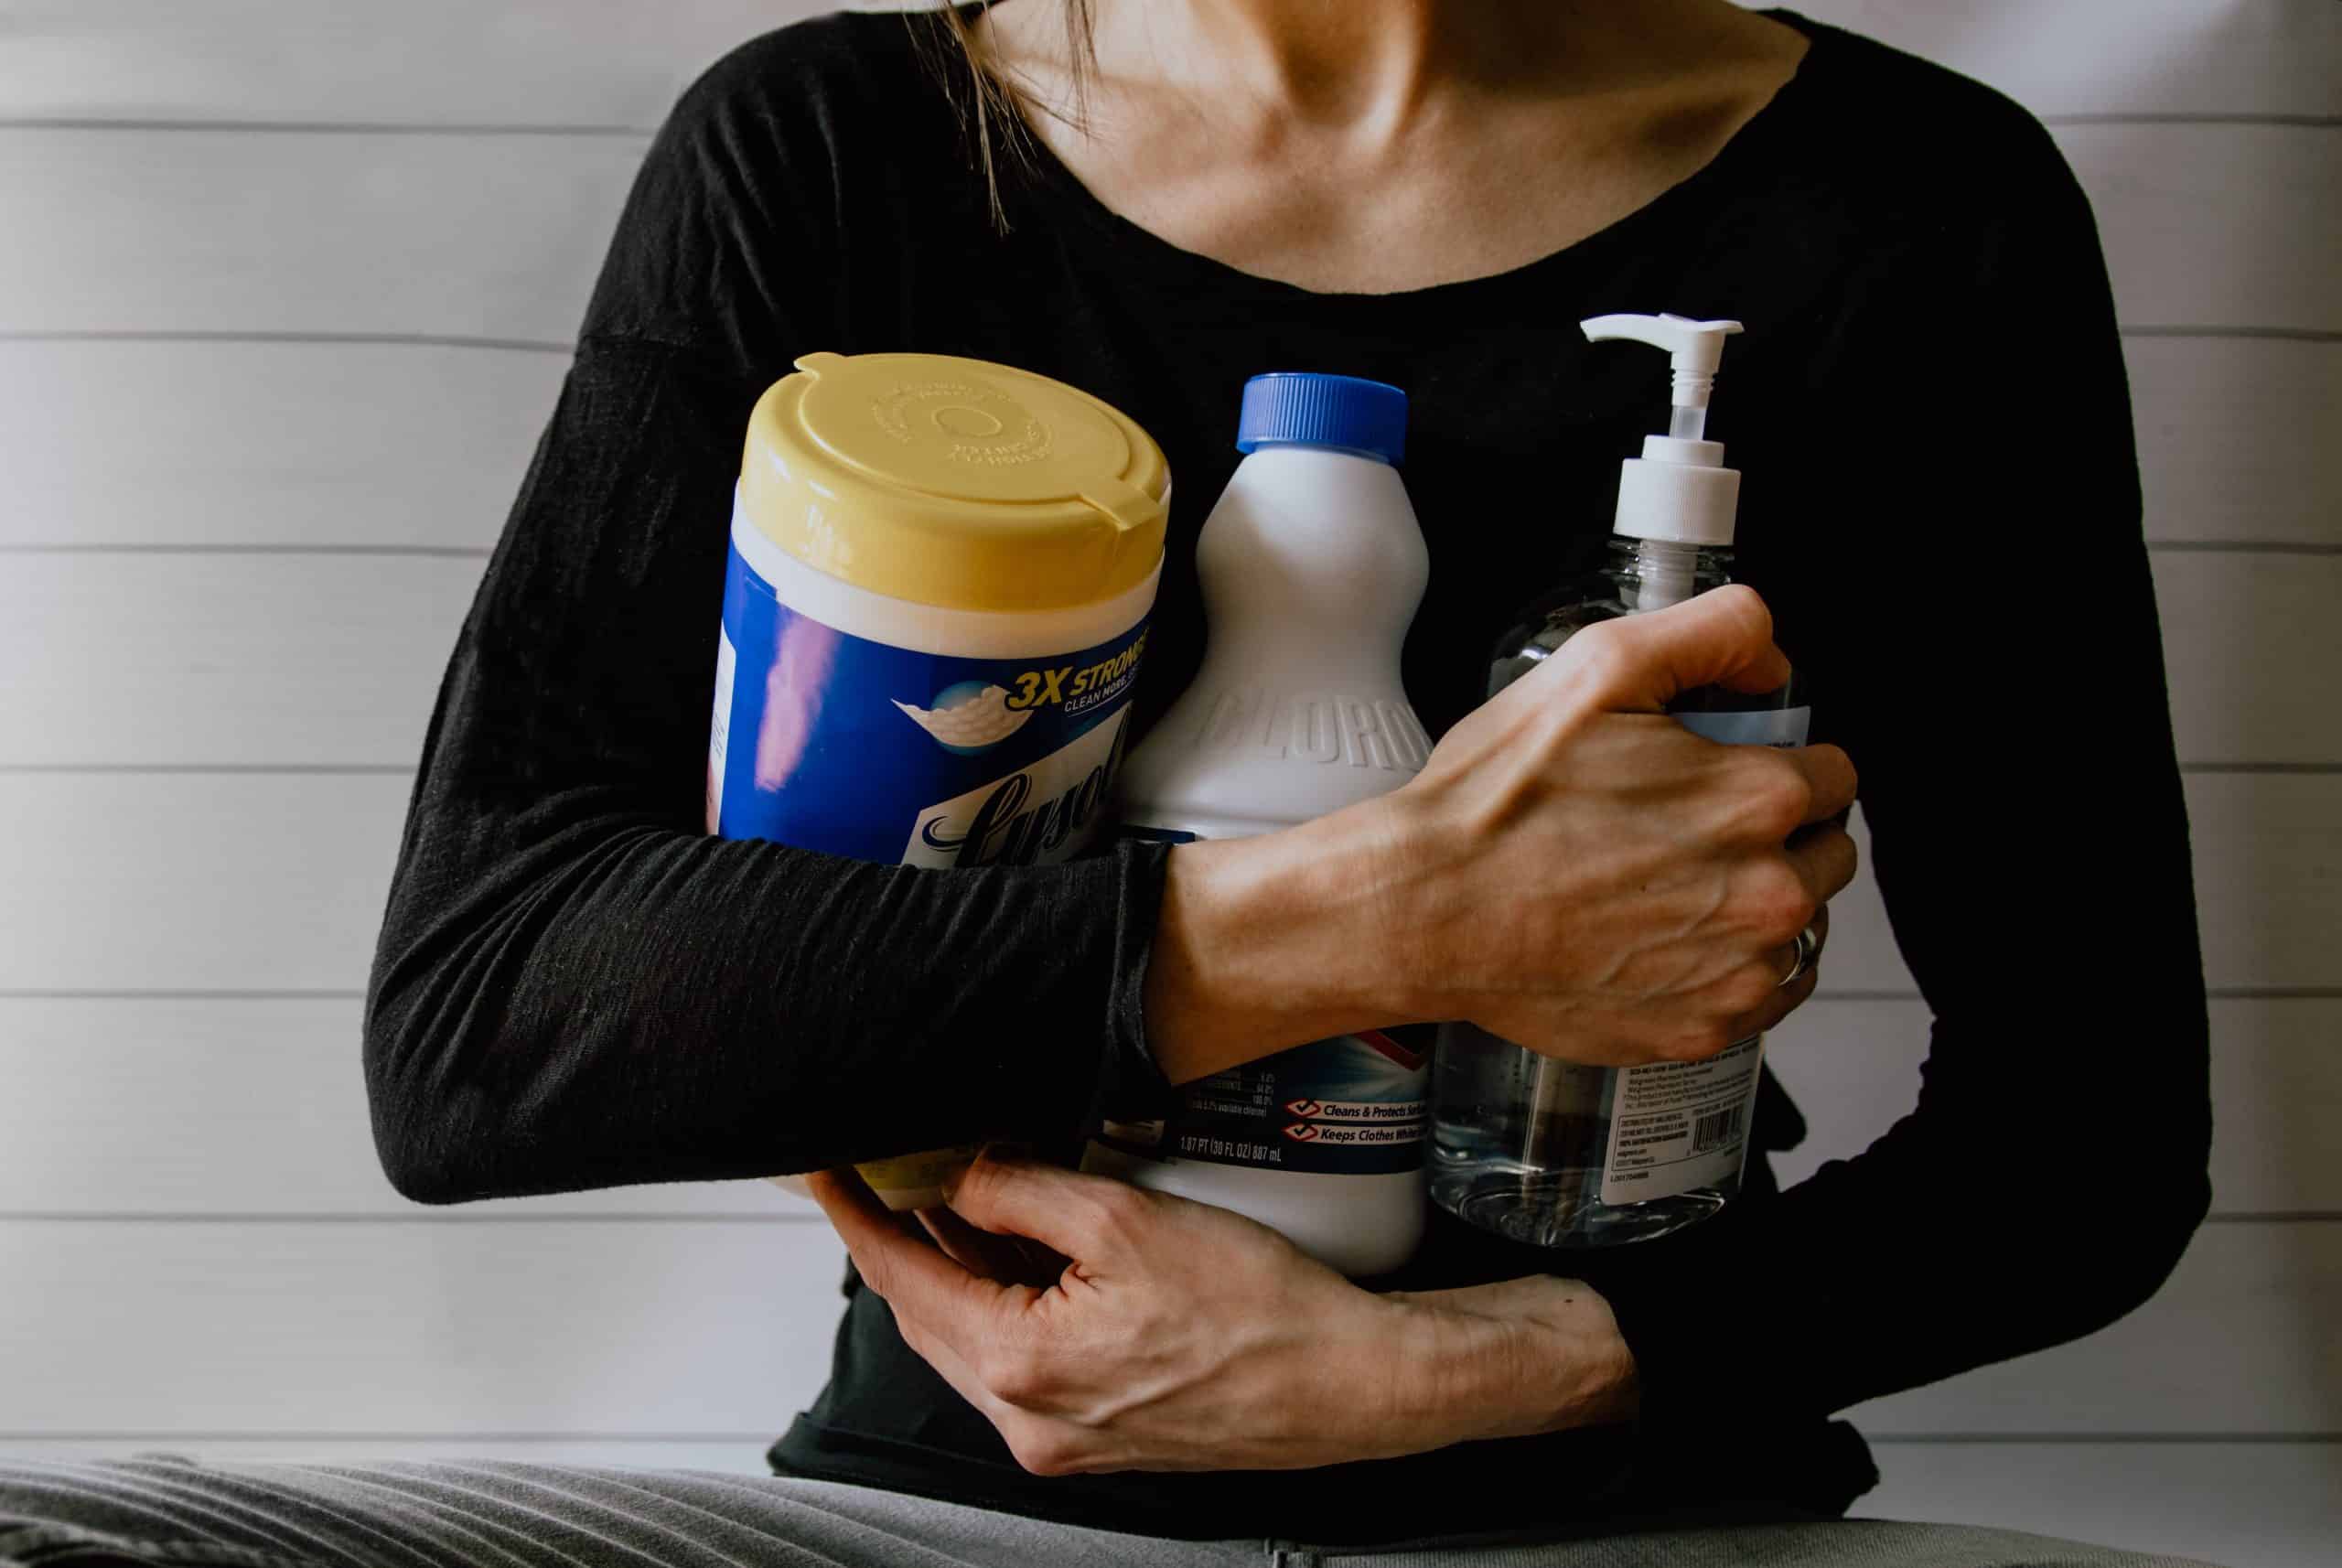 woman holding cleaning products